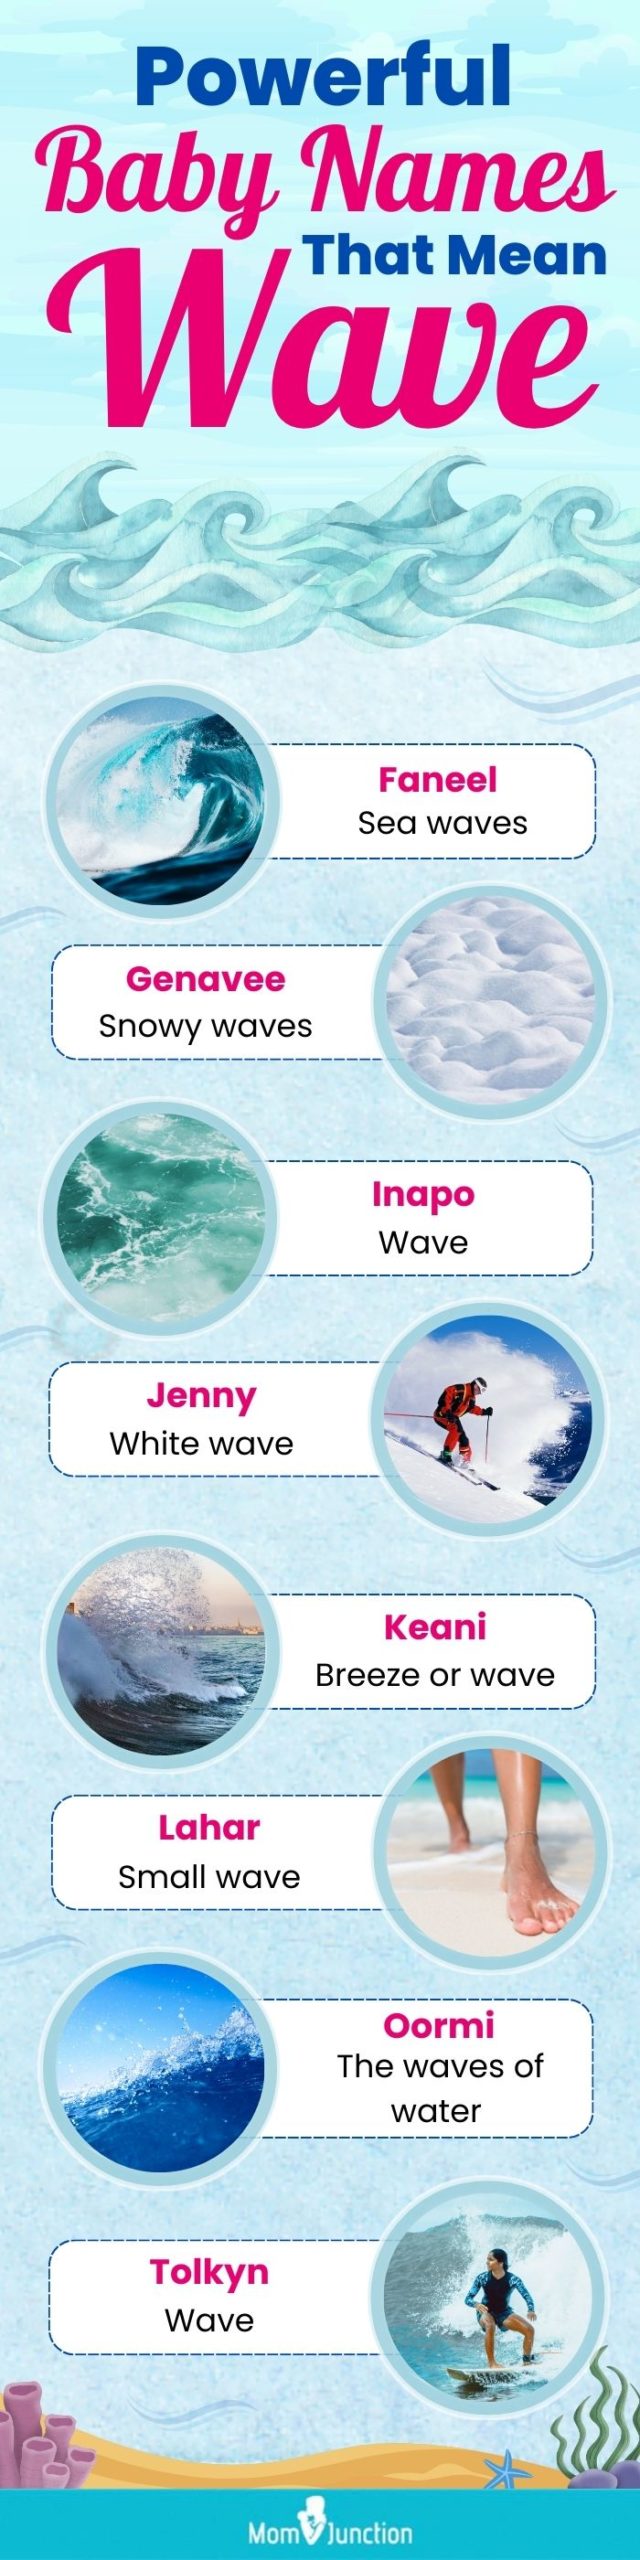 powerful baby names that mean wave (infographic)